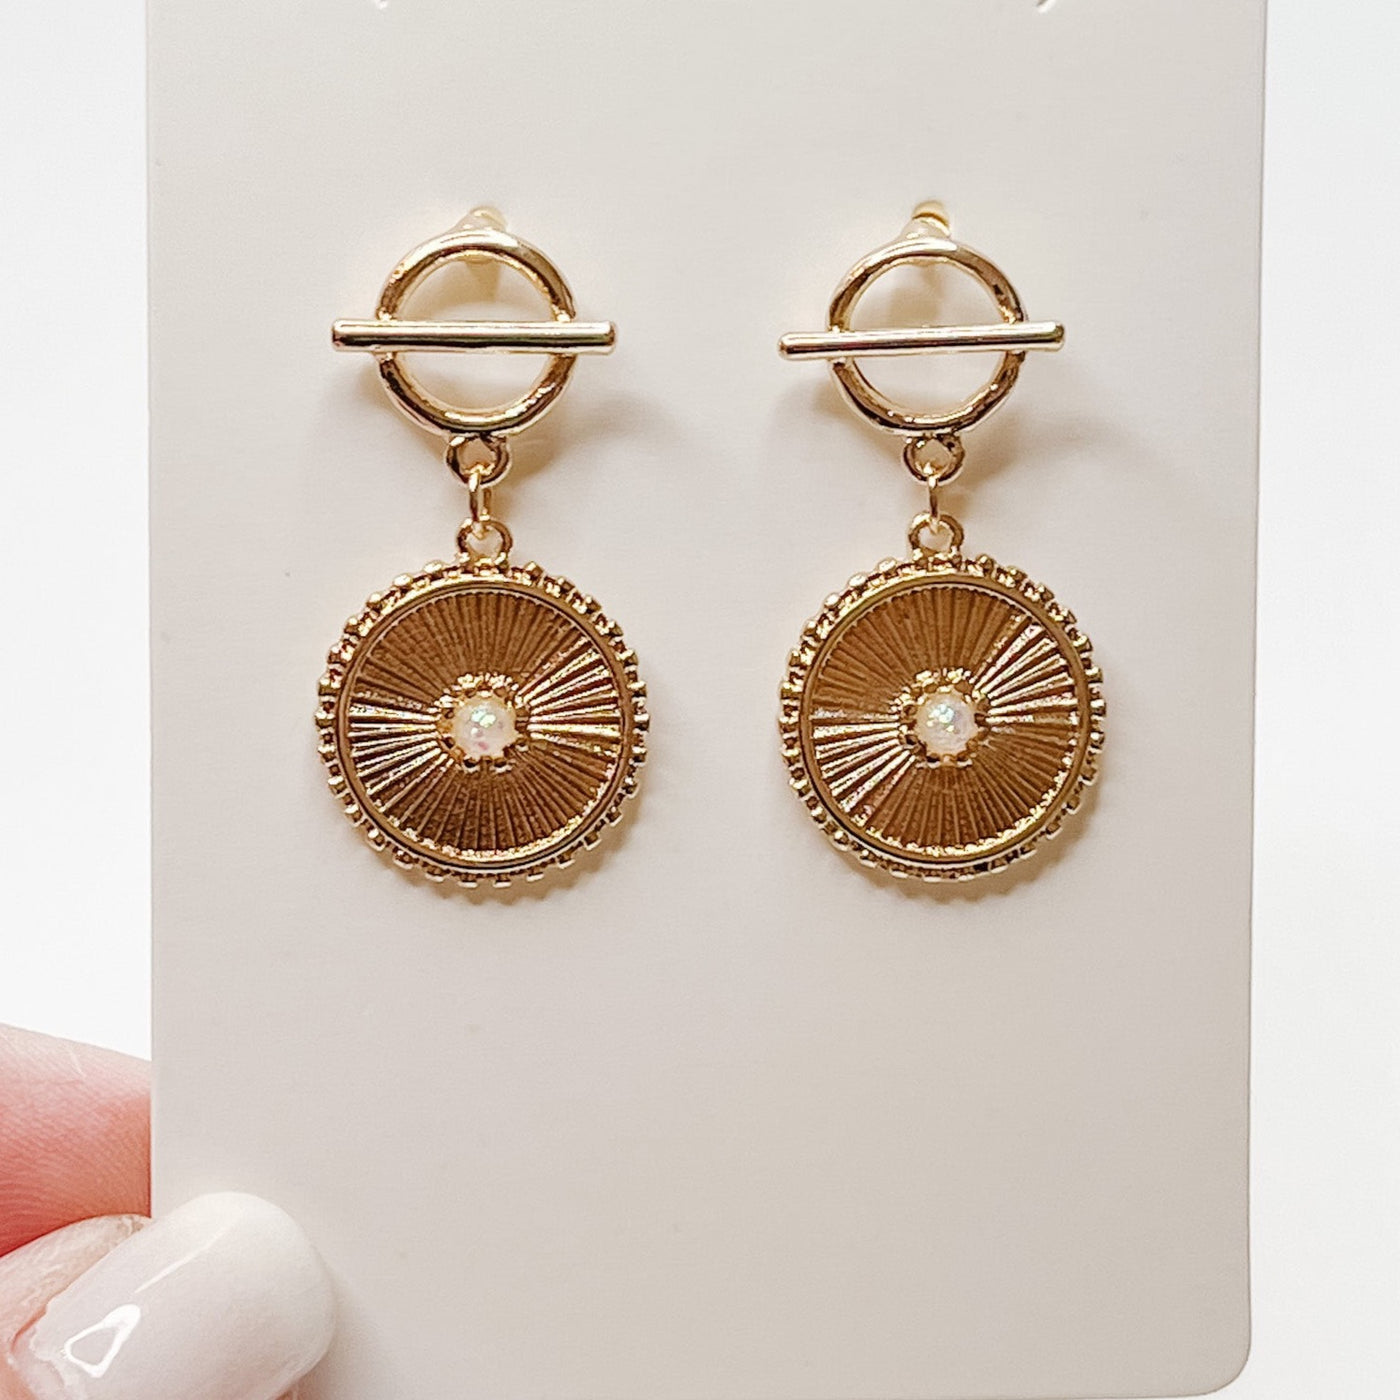 gold dangle hoops with an opal centered in a textured gold circular charm